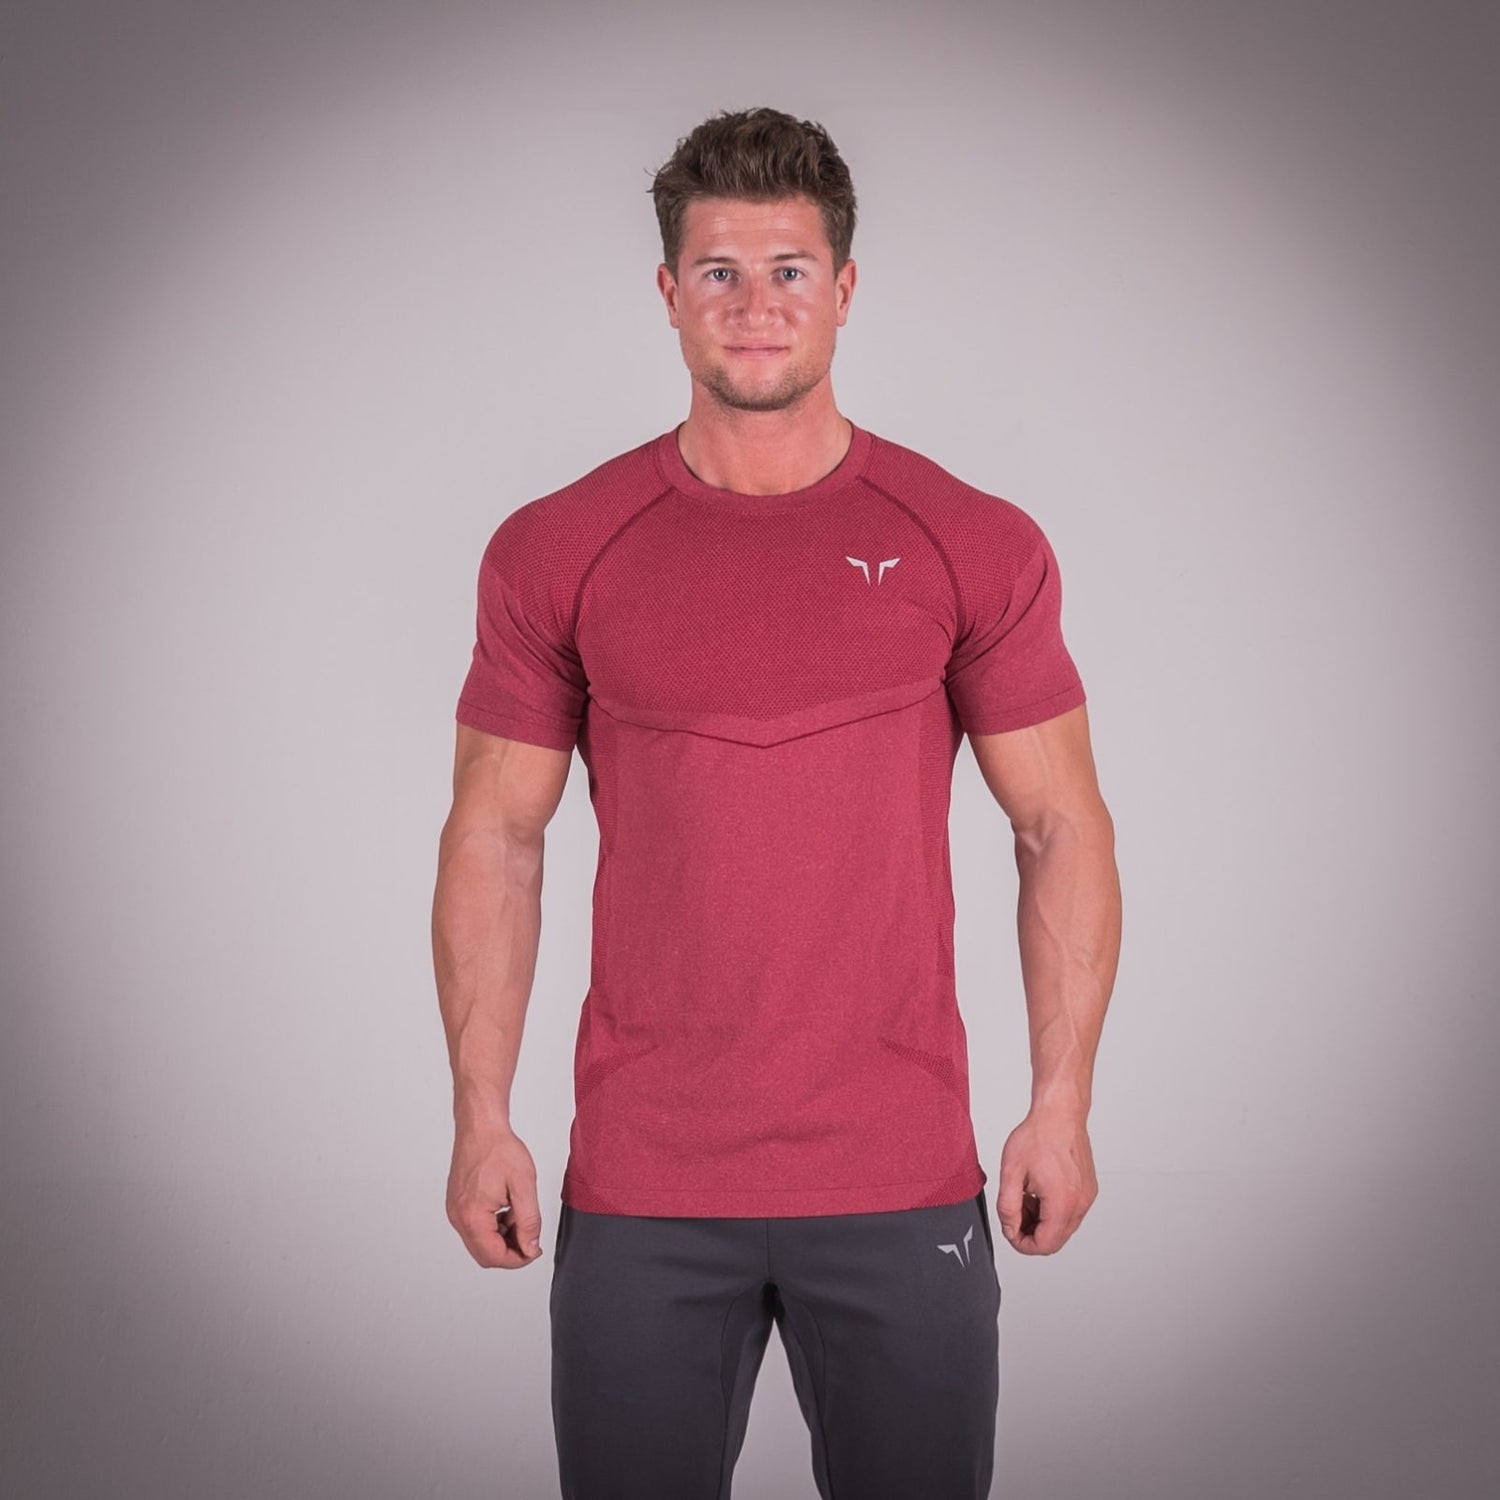 Cv Seamless Dry Knit Tee Bali Red In Half Sleeves Gym T Shirts Men Squatwolf